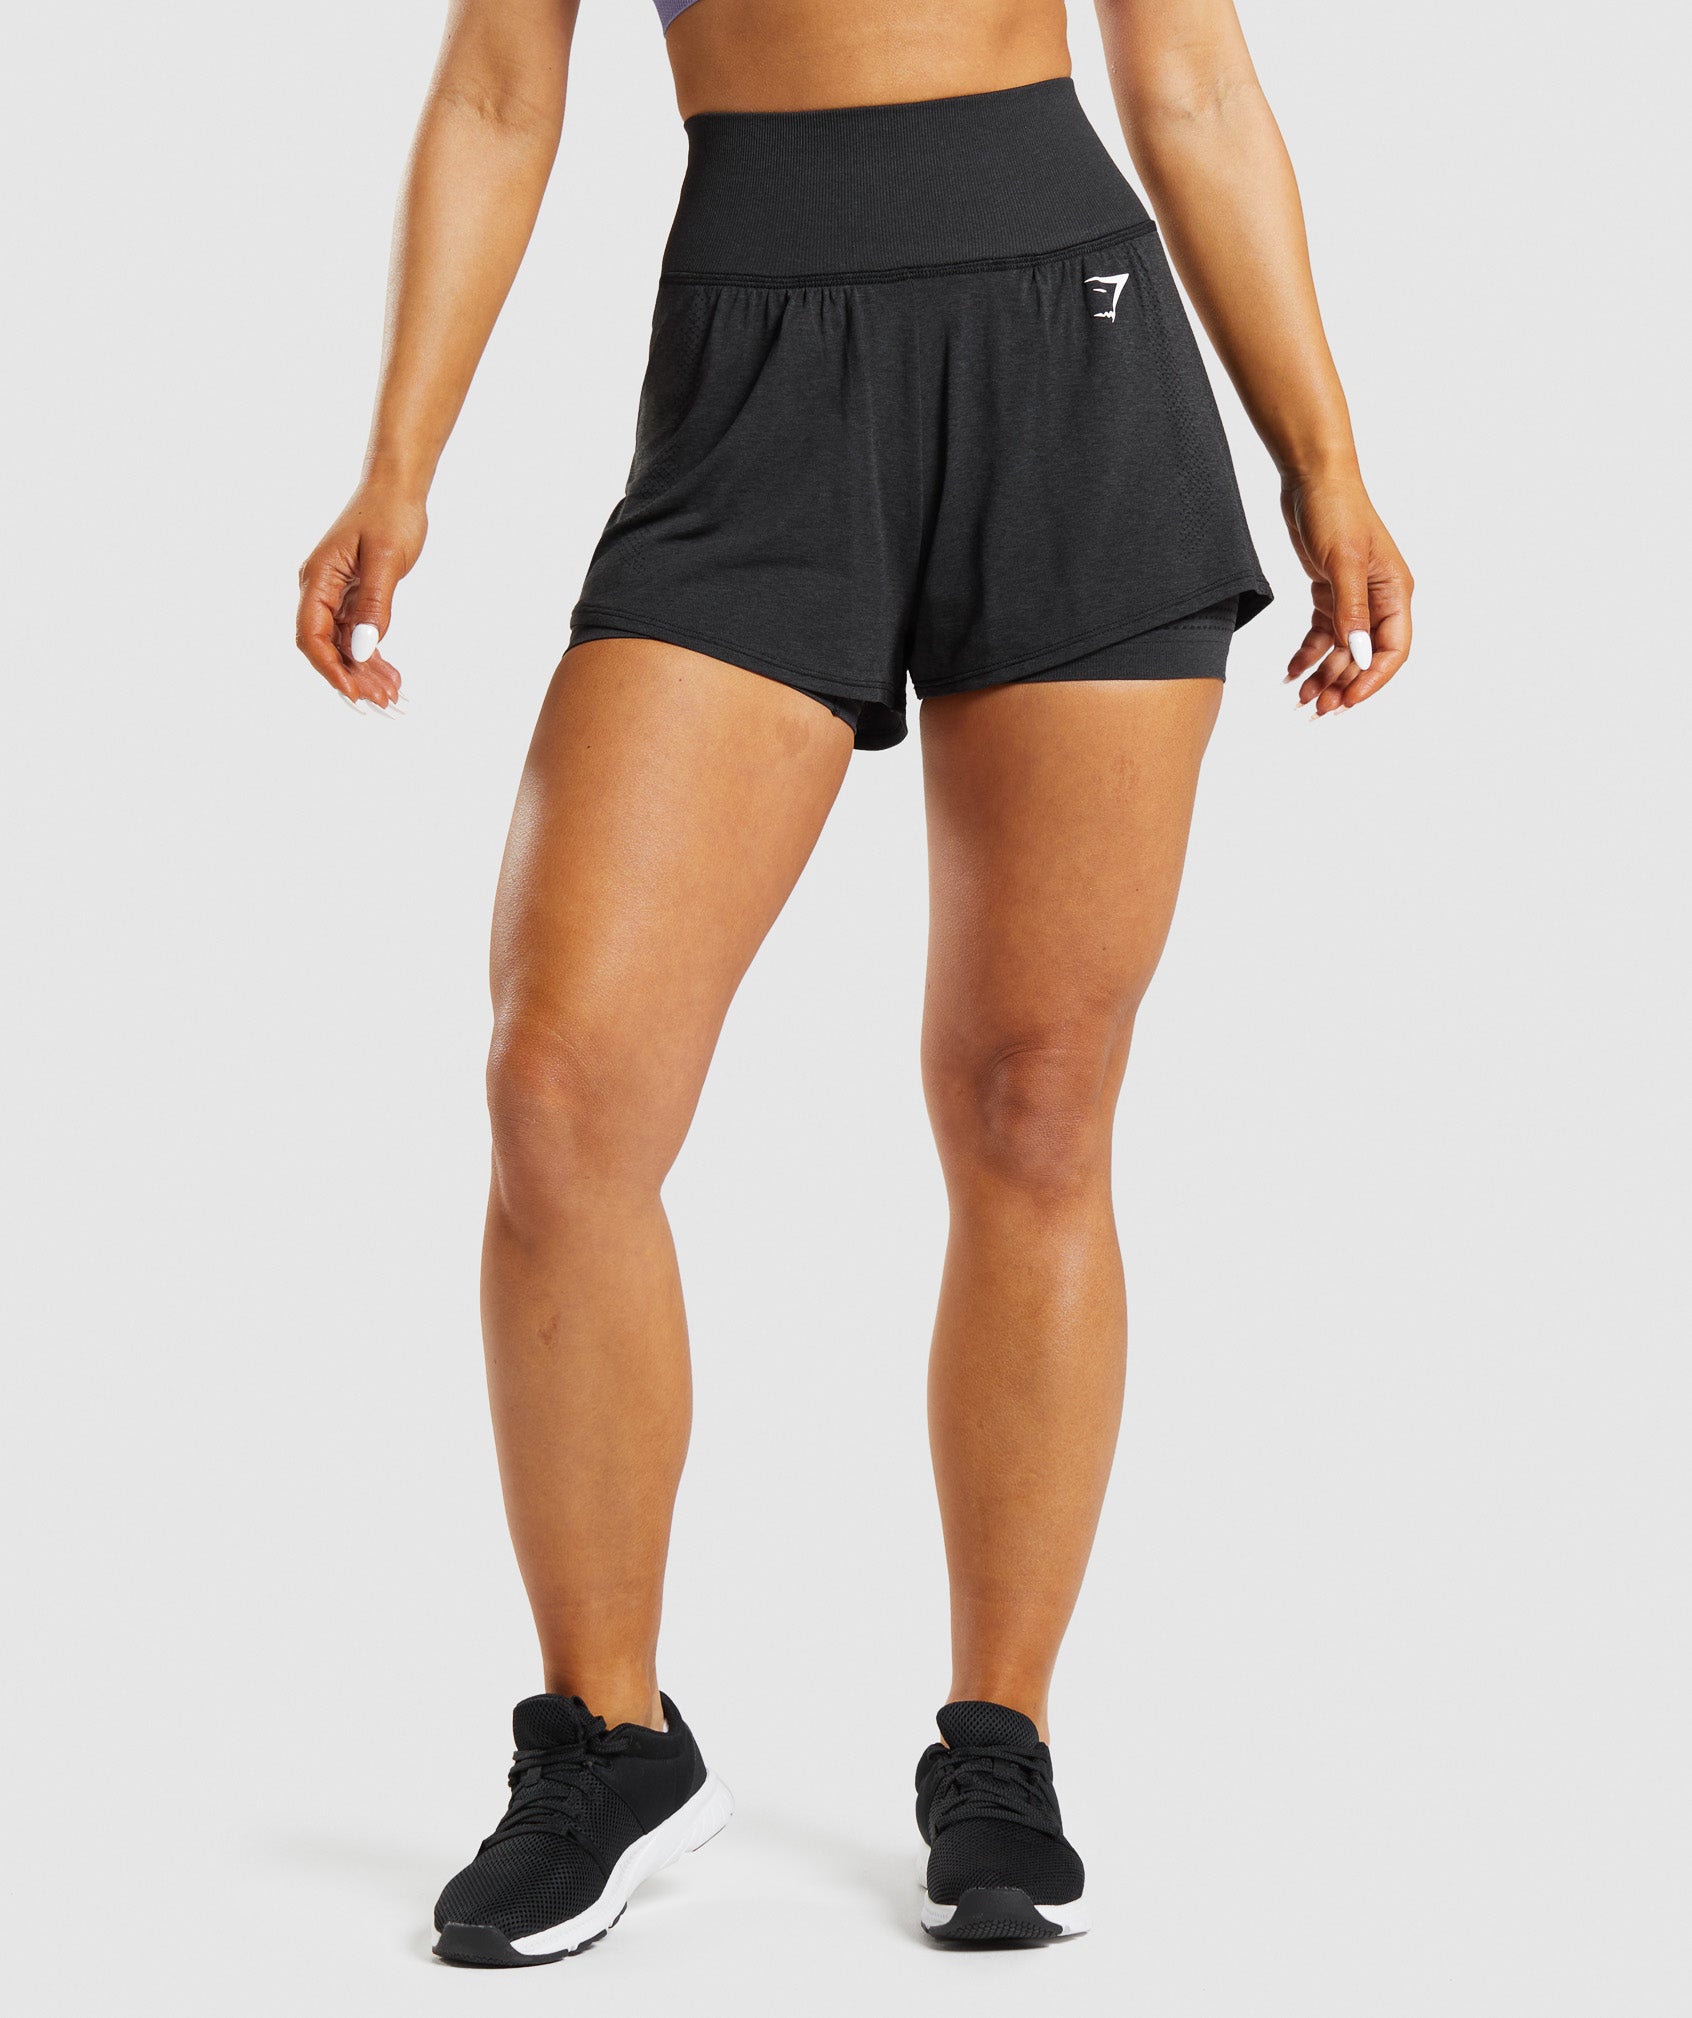 Womens Workout Shorts - Fitness & Gym Workout Shorts in US